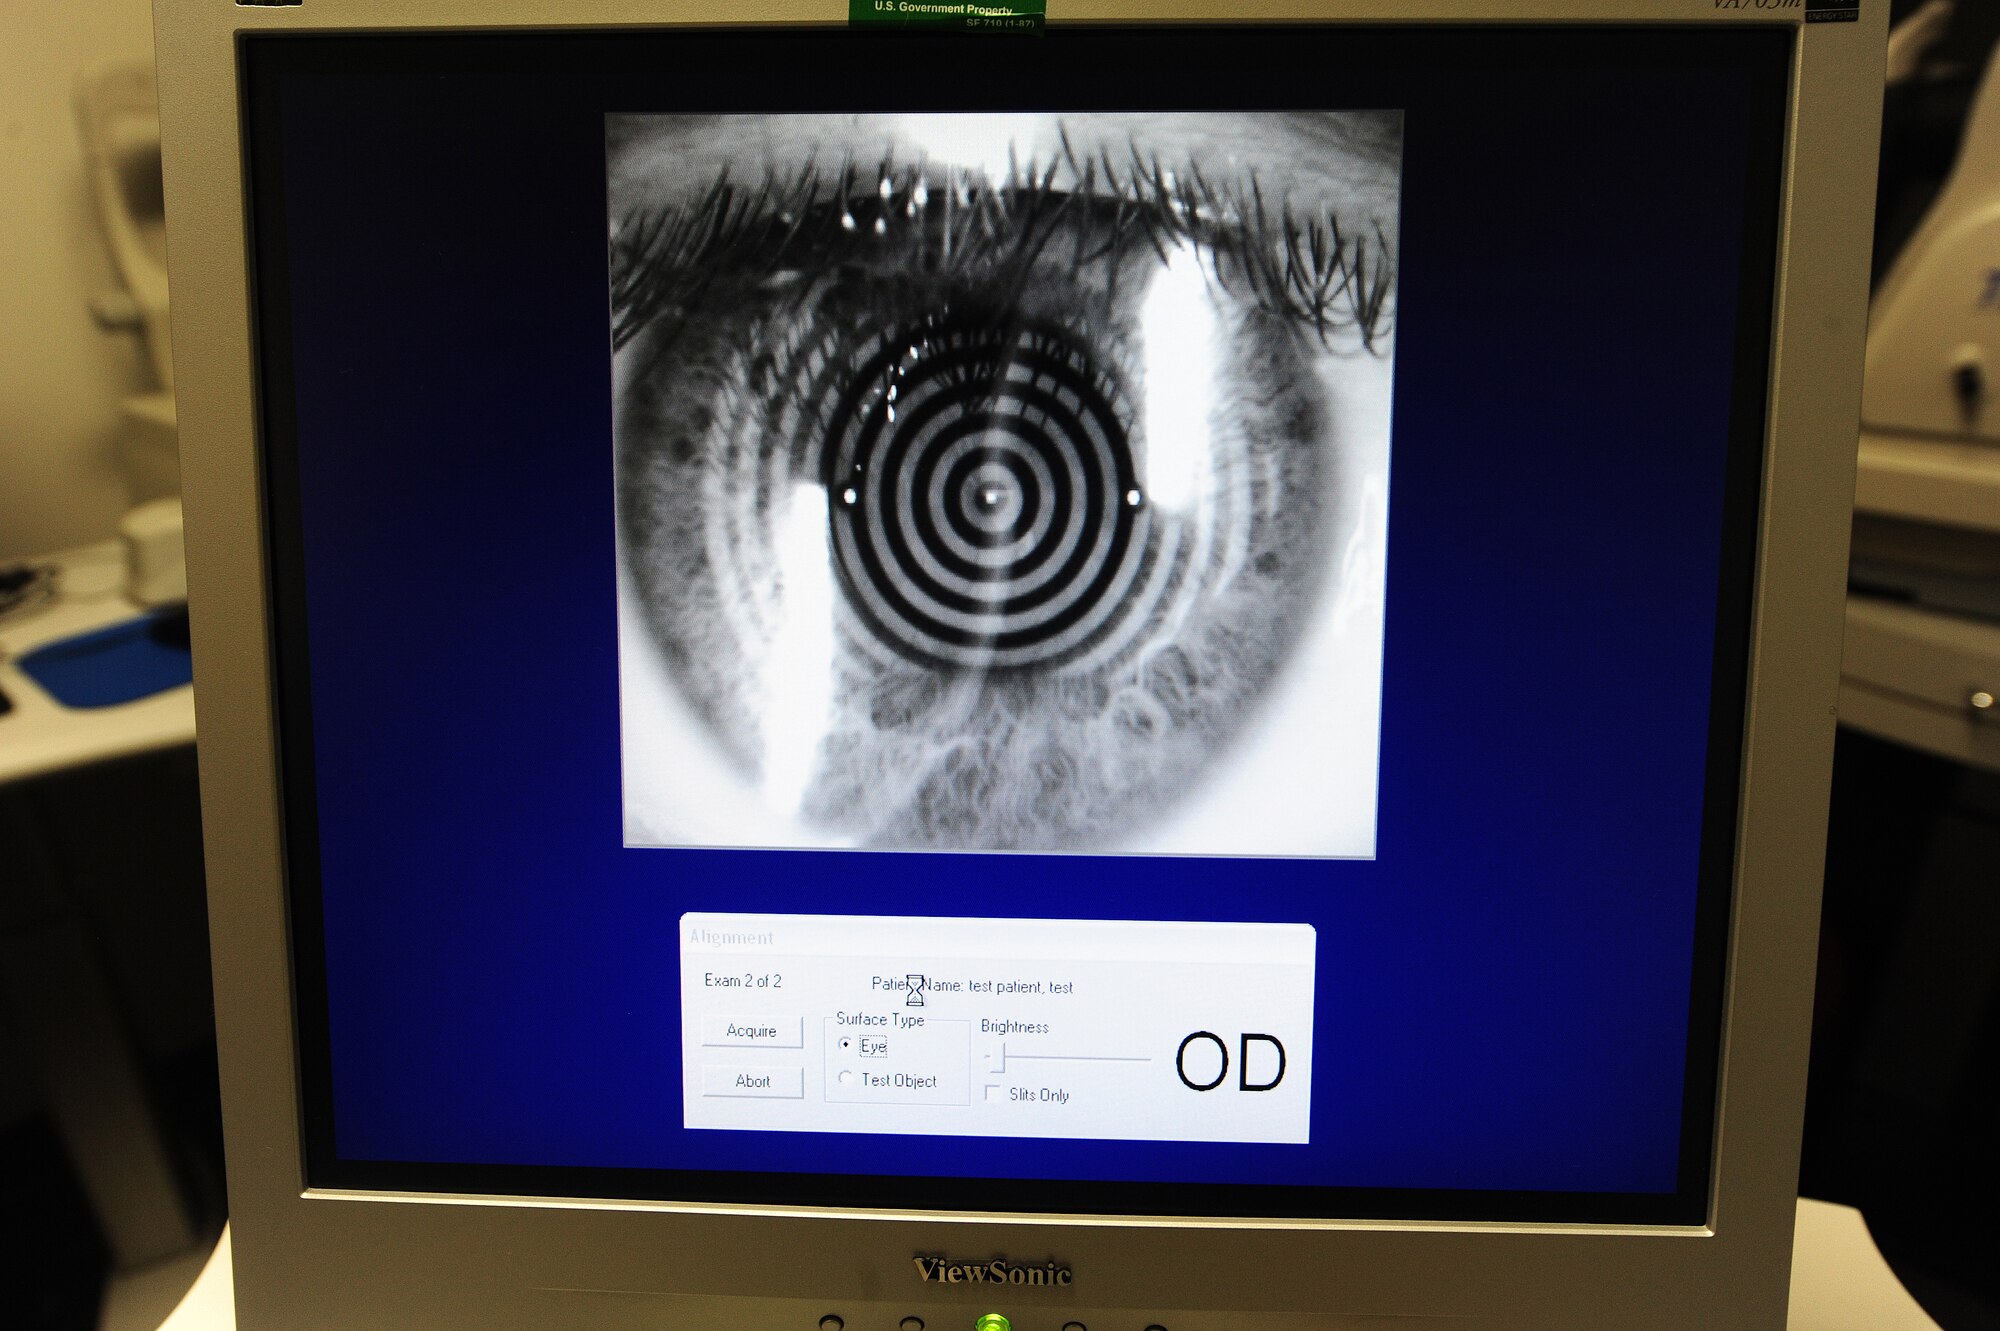 An orb scan is used to evaluate a patient’s eye in the optometry clinic at Whiteman Air Force Base, Mo., Sept. 4, 2013. The orb scan measures the curvature of the cornea of a patient’s eye. The rings on the screen help evaluate curvature changes and provide a topographical image of the corneal surface. (U.S. Air Force photo by Staff Sgt. Nick Wilson/Released)